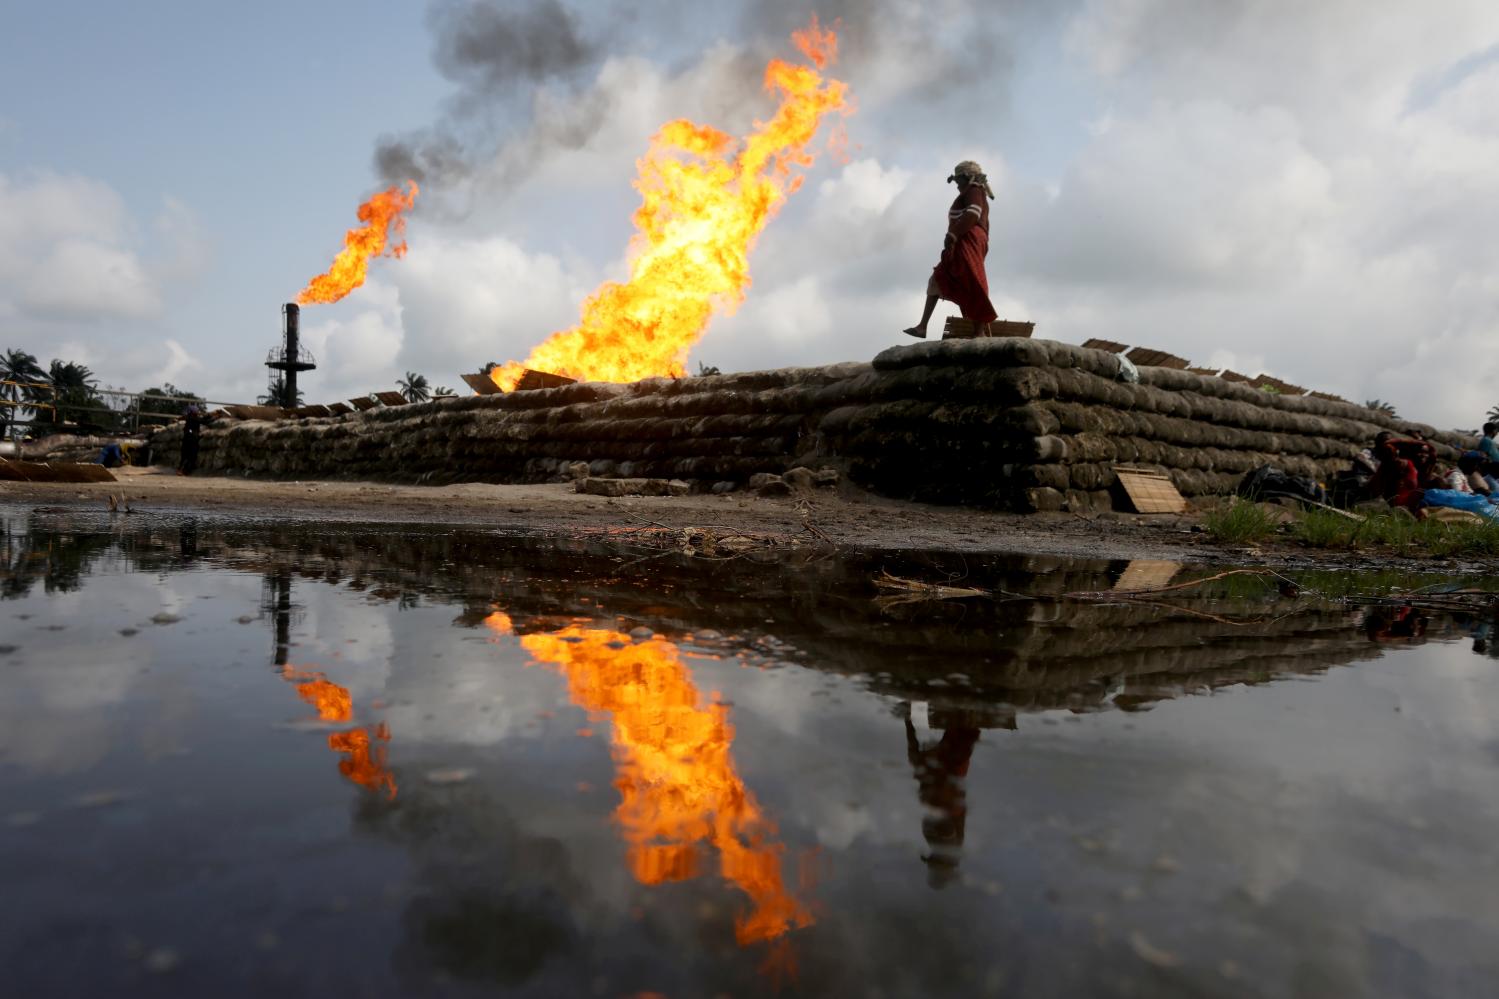 Two gas flaring furnaces and a woman walking on sand barriers are reflected in a pool of oil-smeared water at a flow station in Ughelli, Delta State, Nigeria September 17, 2020. Picture taken September 17, 2020. REUTERS/Afolabi Sotunde     TPX IMAGES OF THE DAY